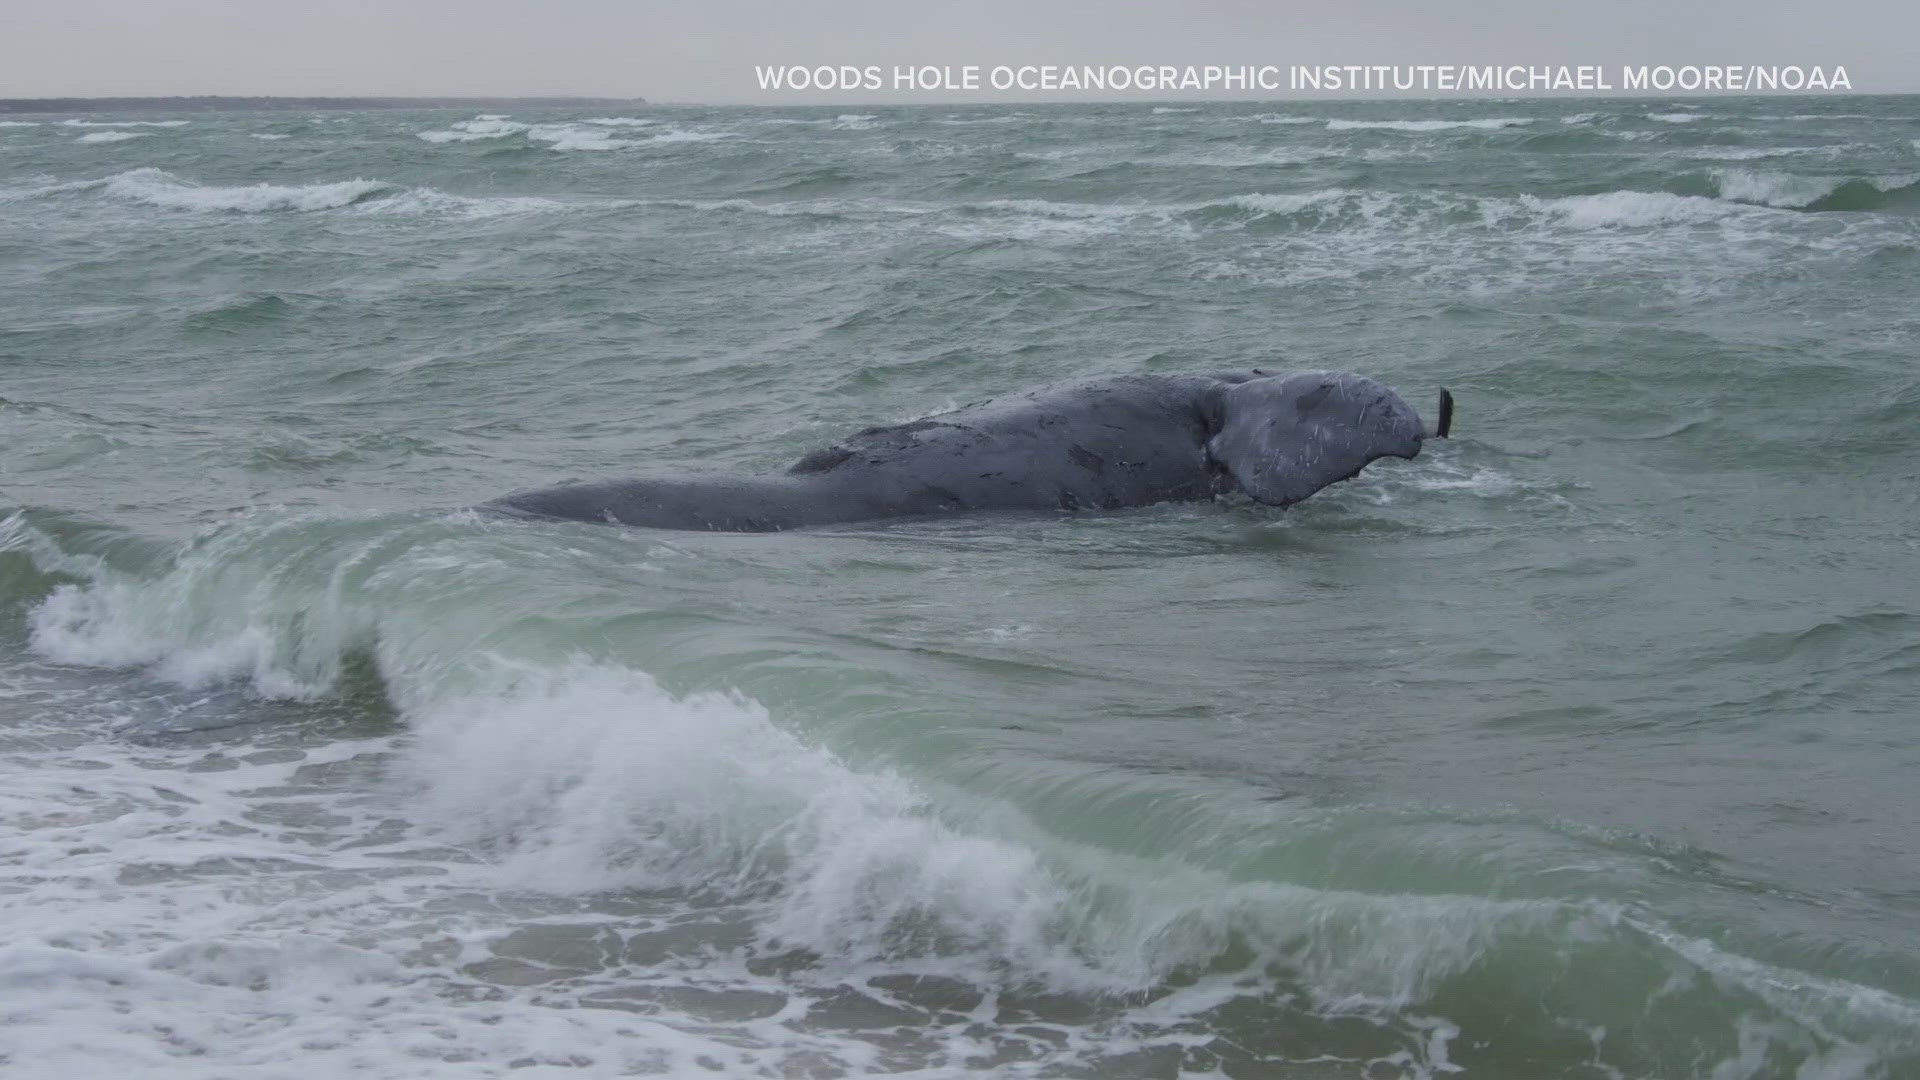 The North Atlantic right whale was found washed ashore on the coast of Martha's Vineyard.